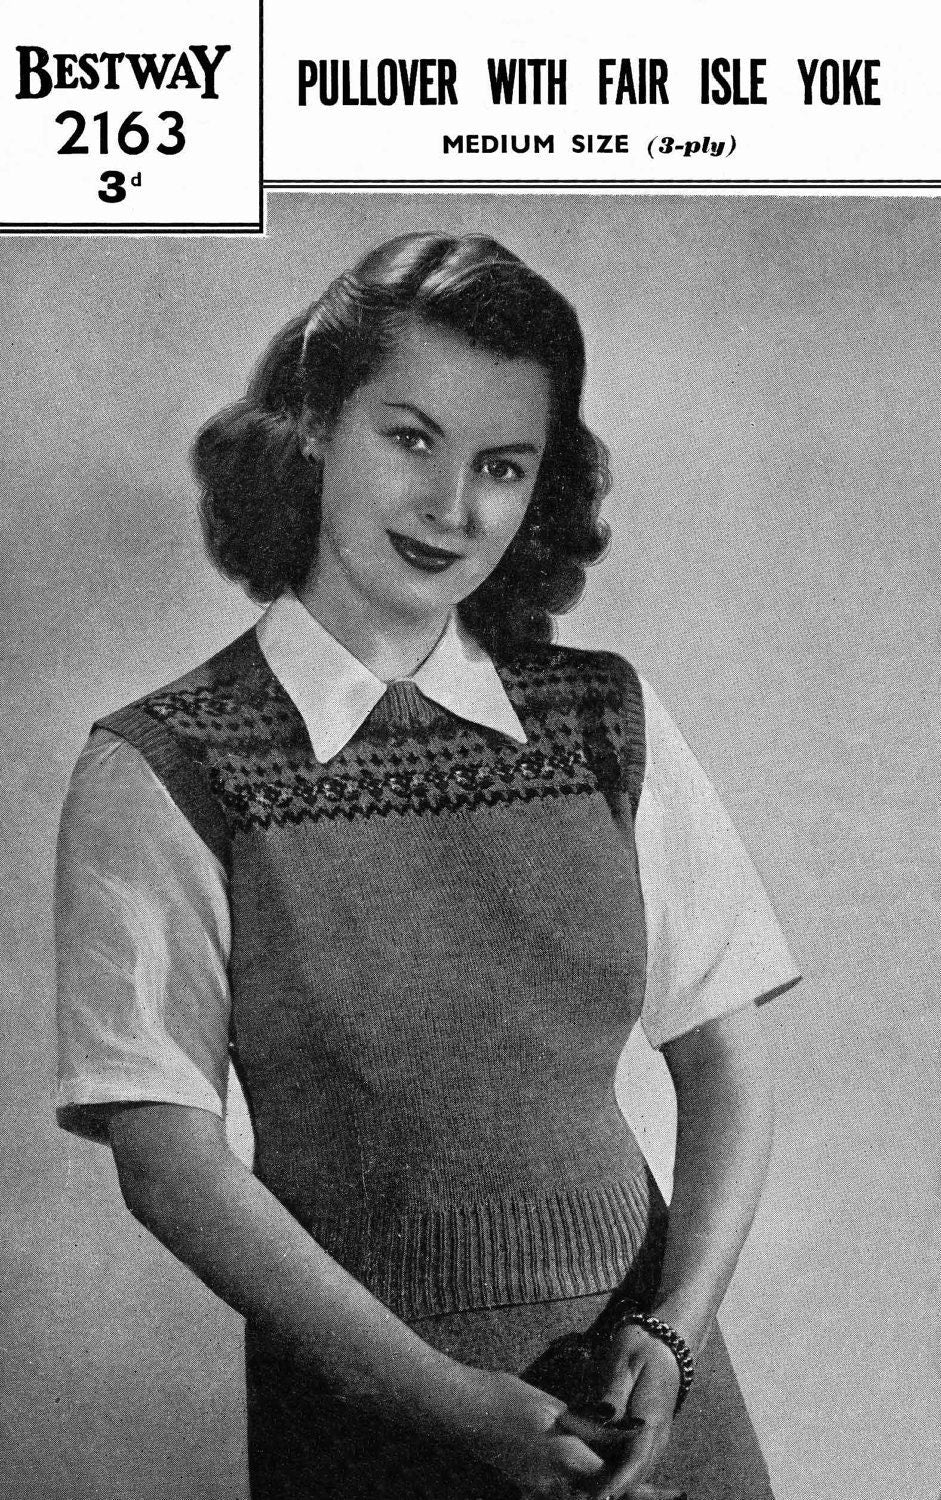 Ladies Pullover with Fair Isle Yoke, 34" Bust, 3ply, 40s Knitting Pattern, Bestway 2136